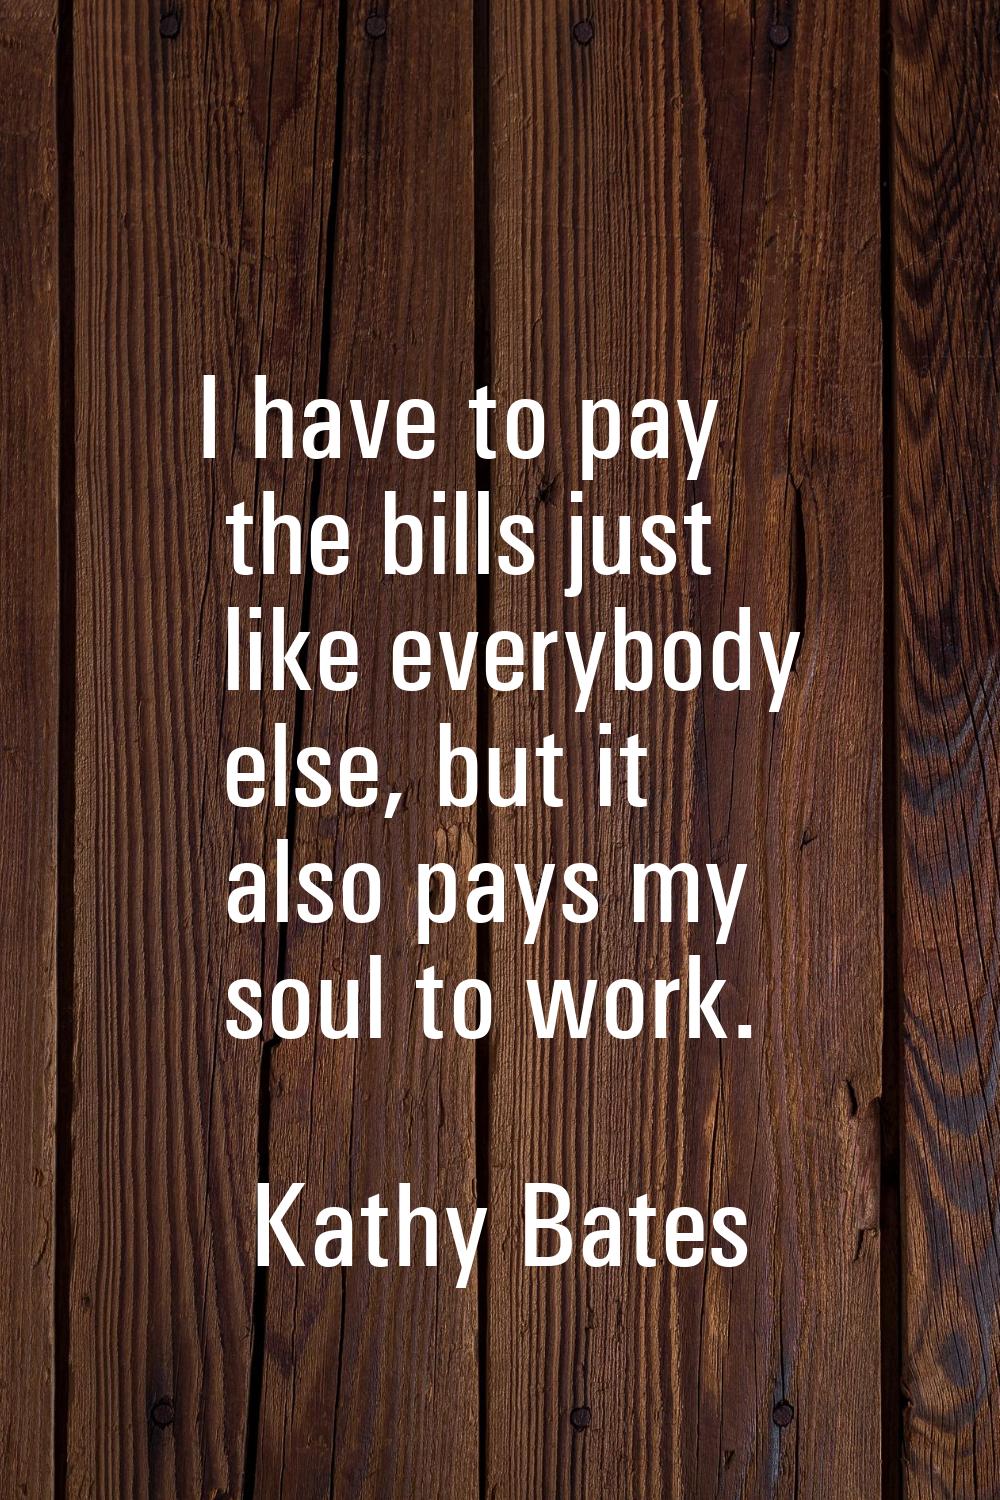 I have to pay the bills just like everybody else, but it also pays my soul to work.